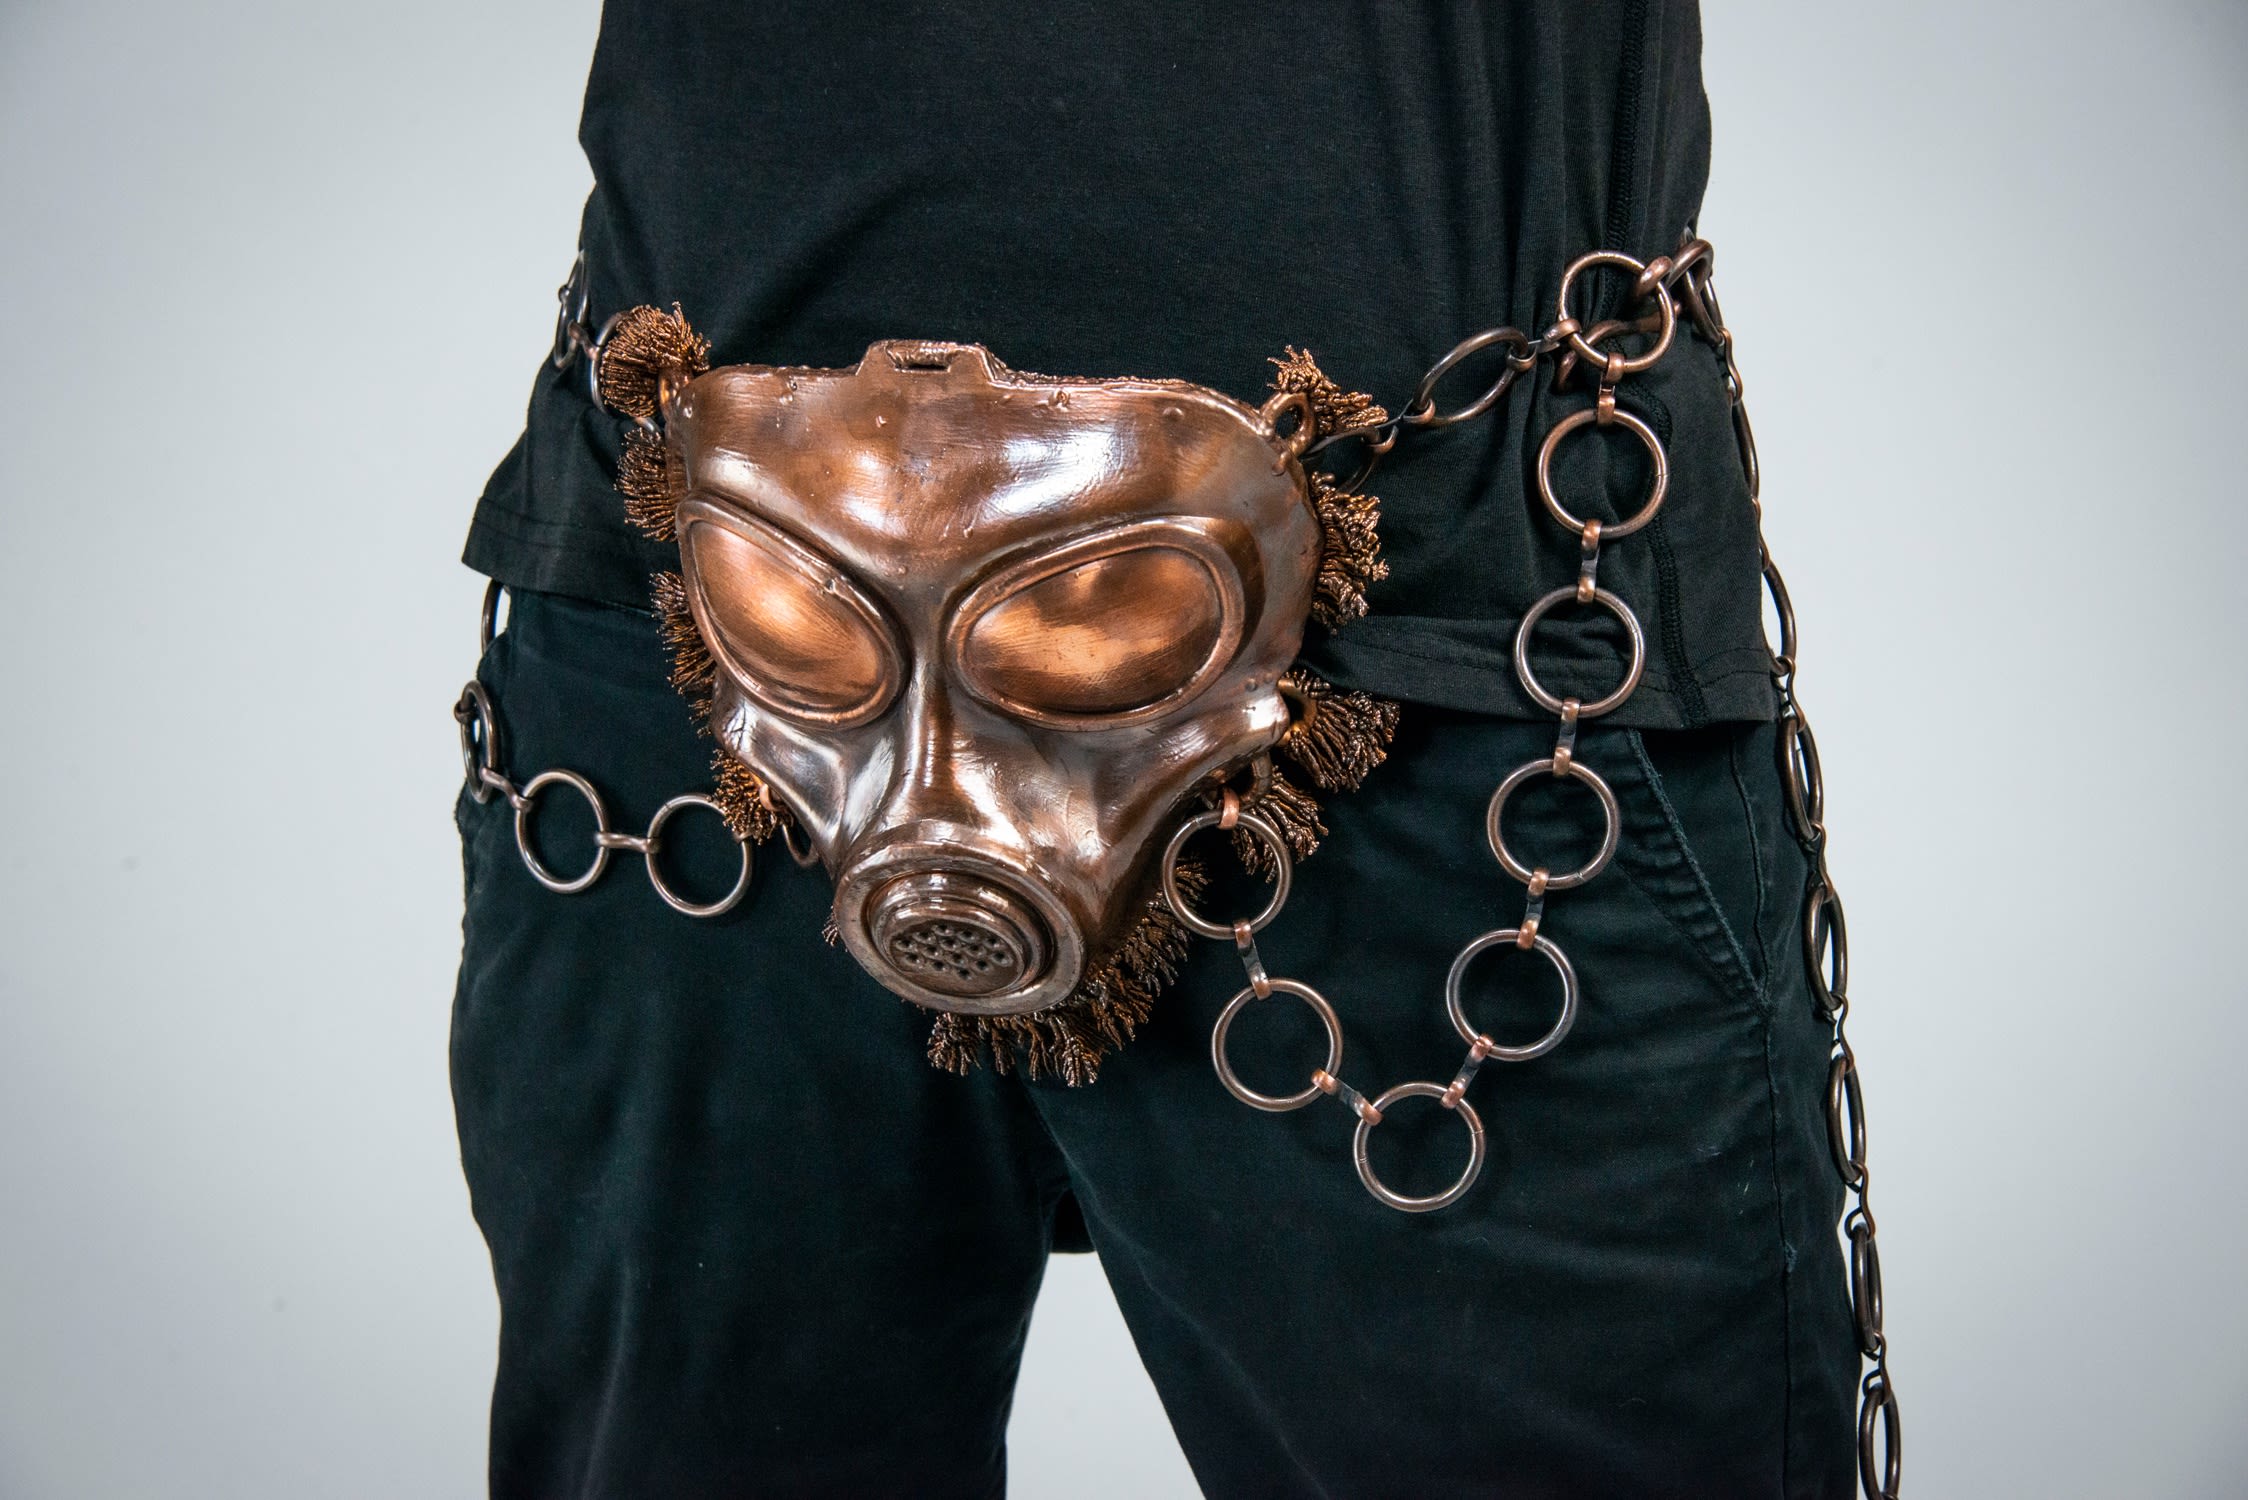 Belt Buckle by Kelly Alge at Form & Concept Gallery